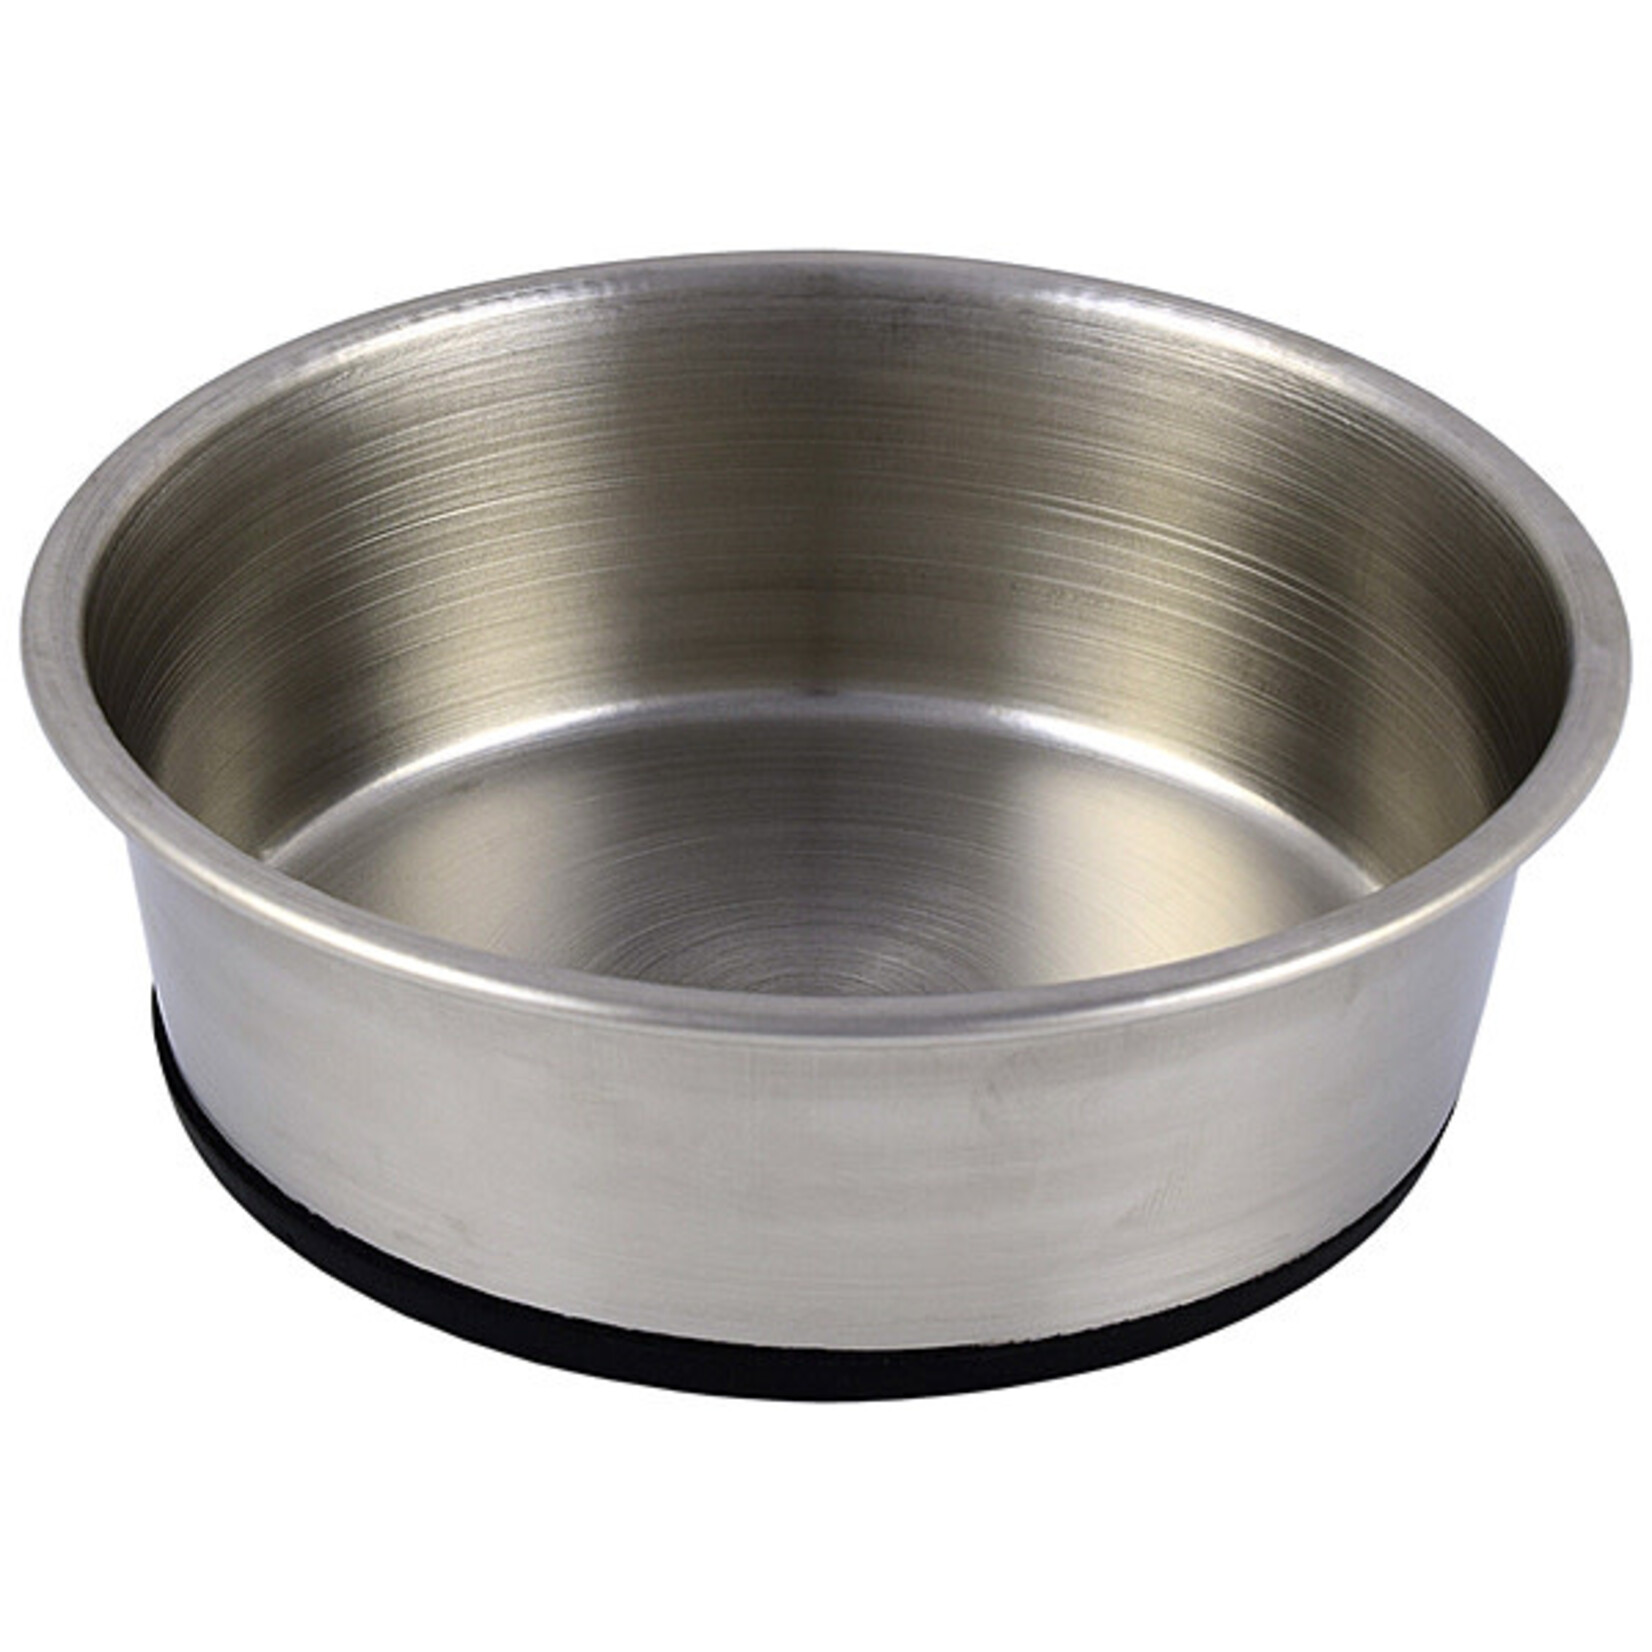 Unleashed Premium Stainless Steel Rubberized Bowl